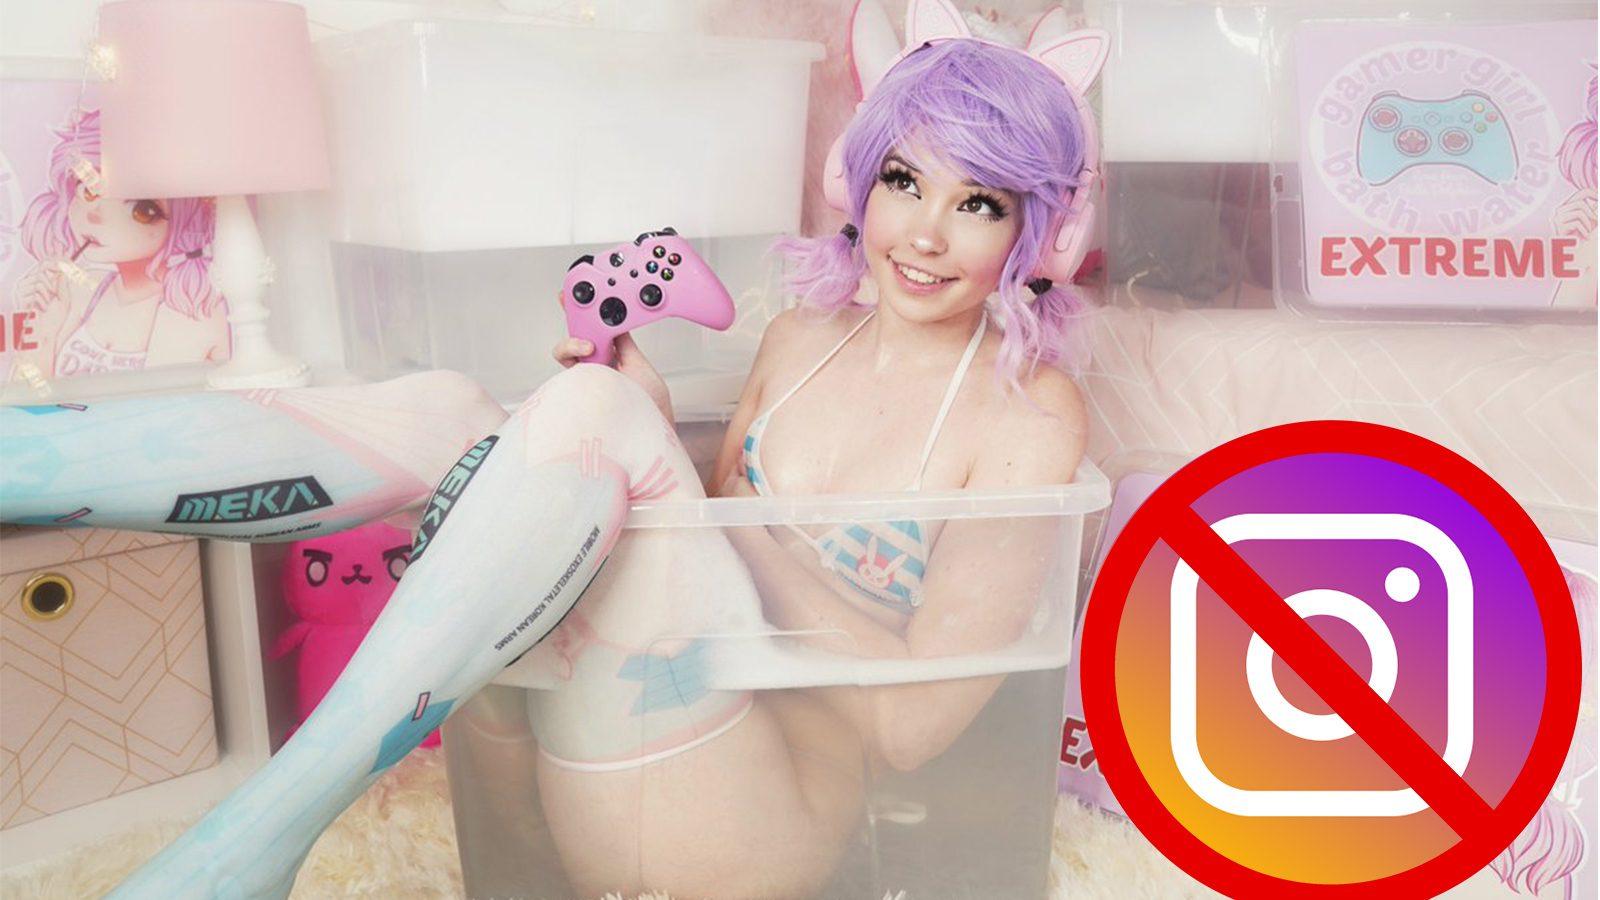 cori babcock recommends belle delphine naked porn pic